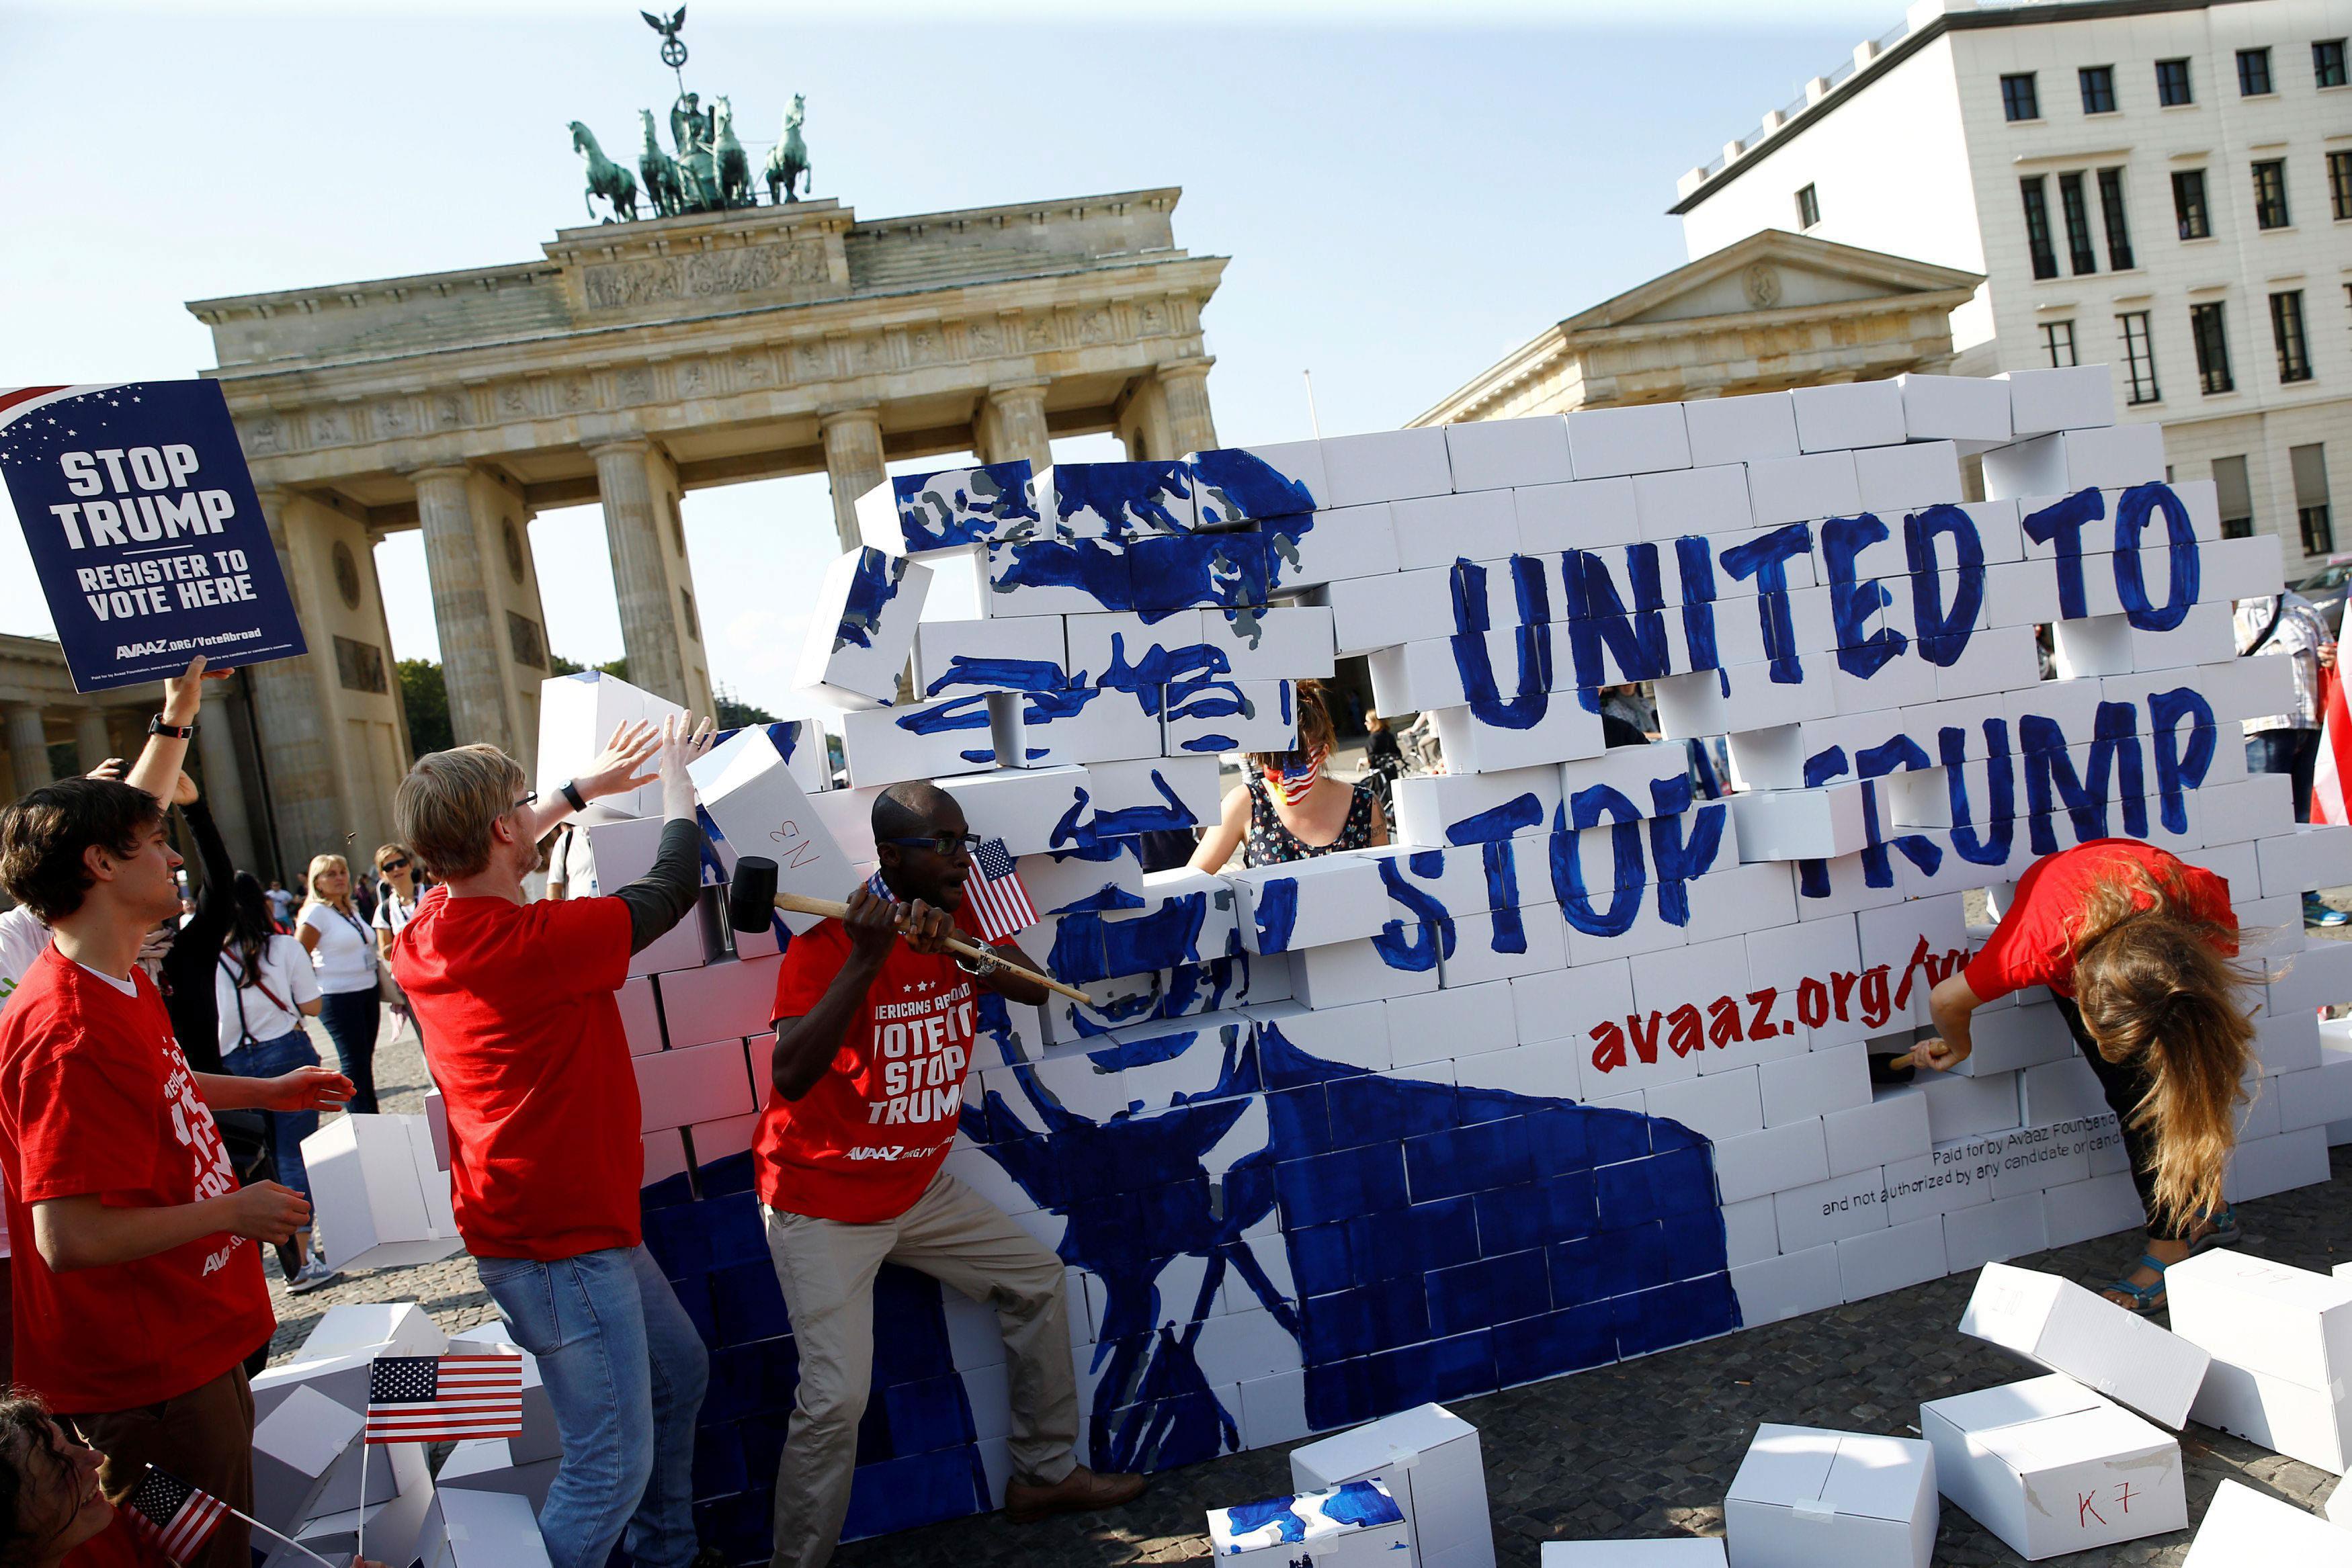 Campaigners pose on a 'United To Stop Trump' cardboard wall in front of the Brandenburg Gate to urge